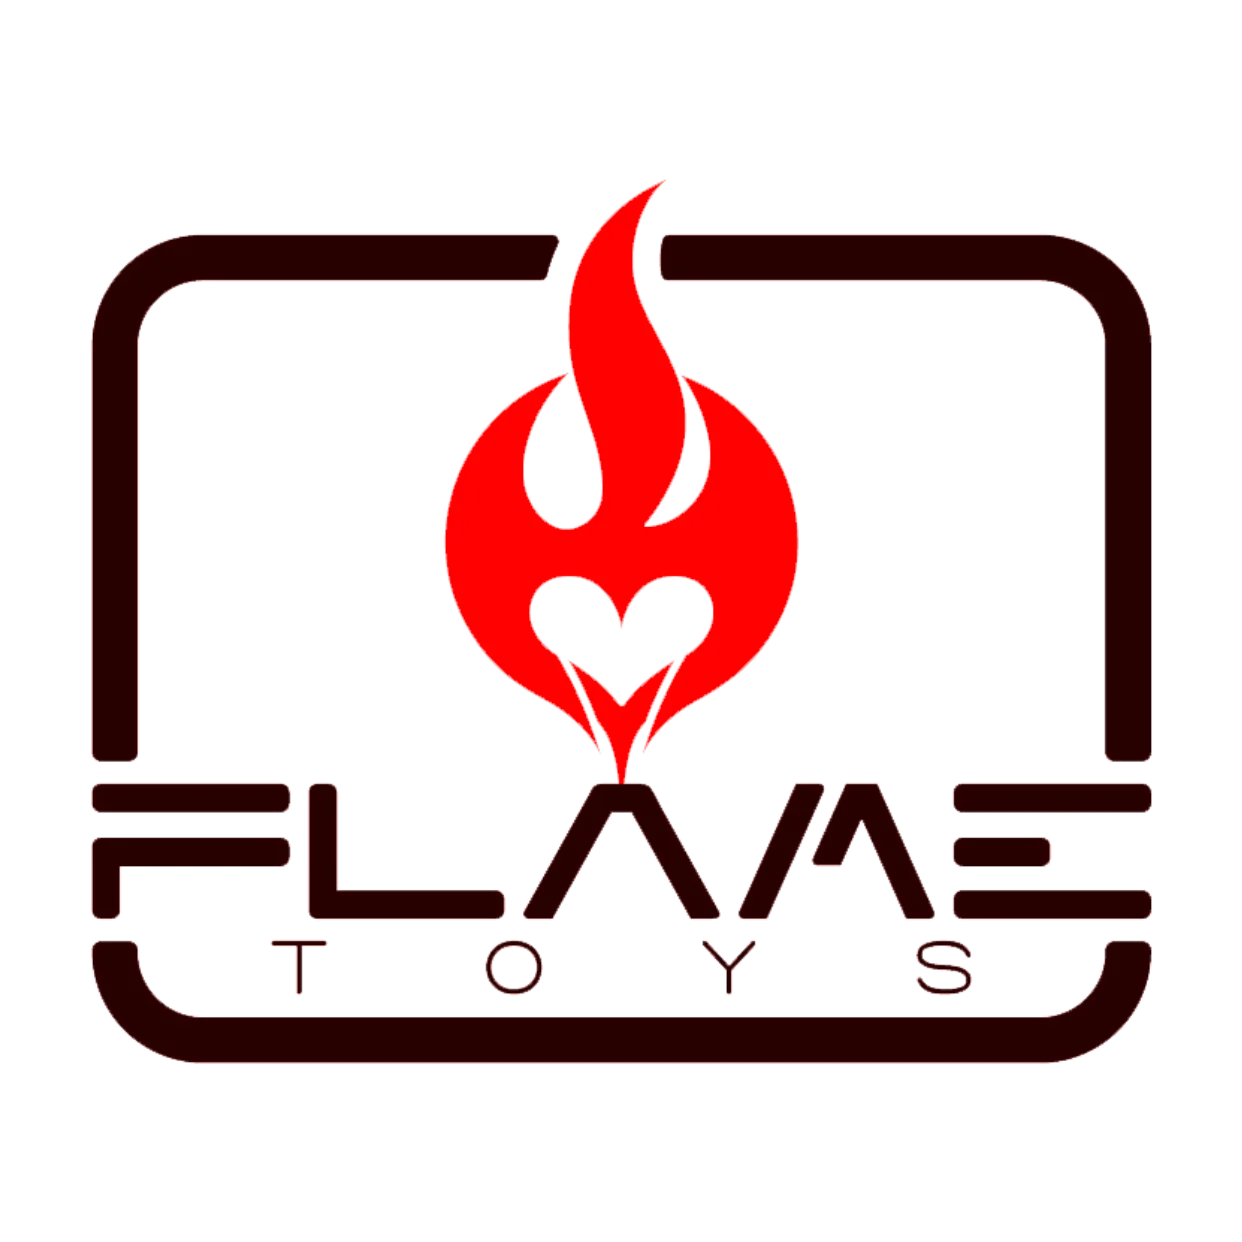 Logo of Flame Toys, showcasing a fiery emblem representative of the company's innovative approach to creating high-quality collectible figures and model kits, underlining their commitment to exceptional detail and craftsmanship.